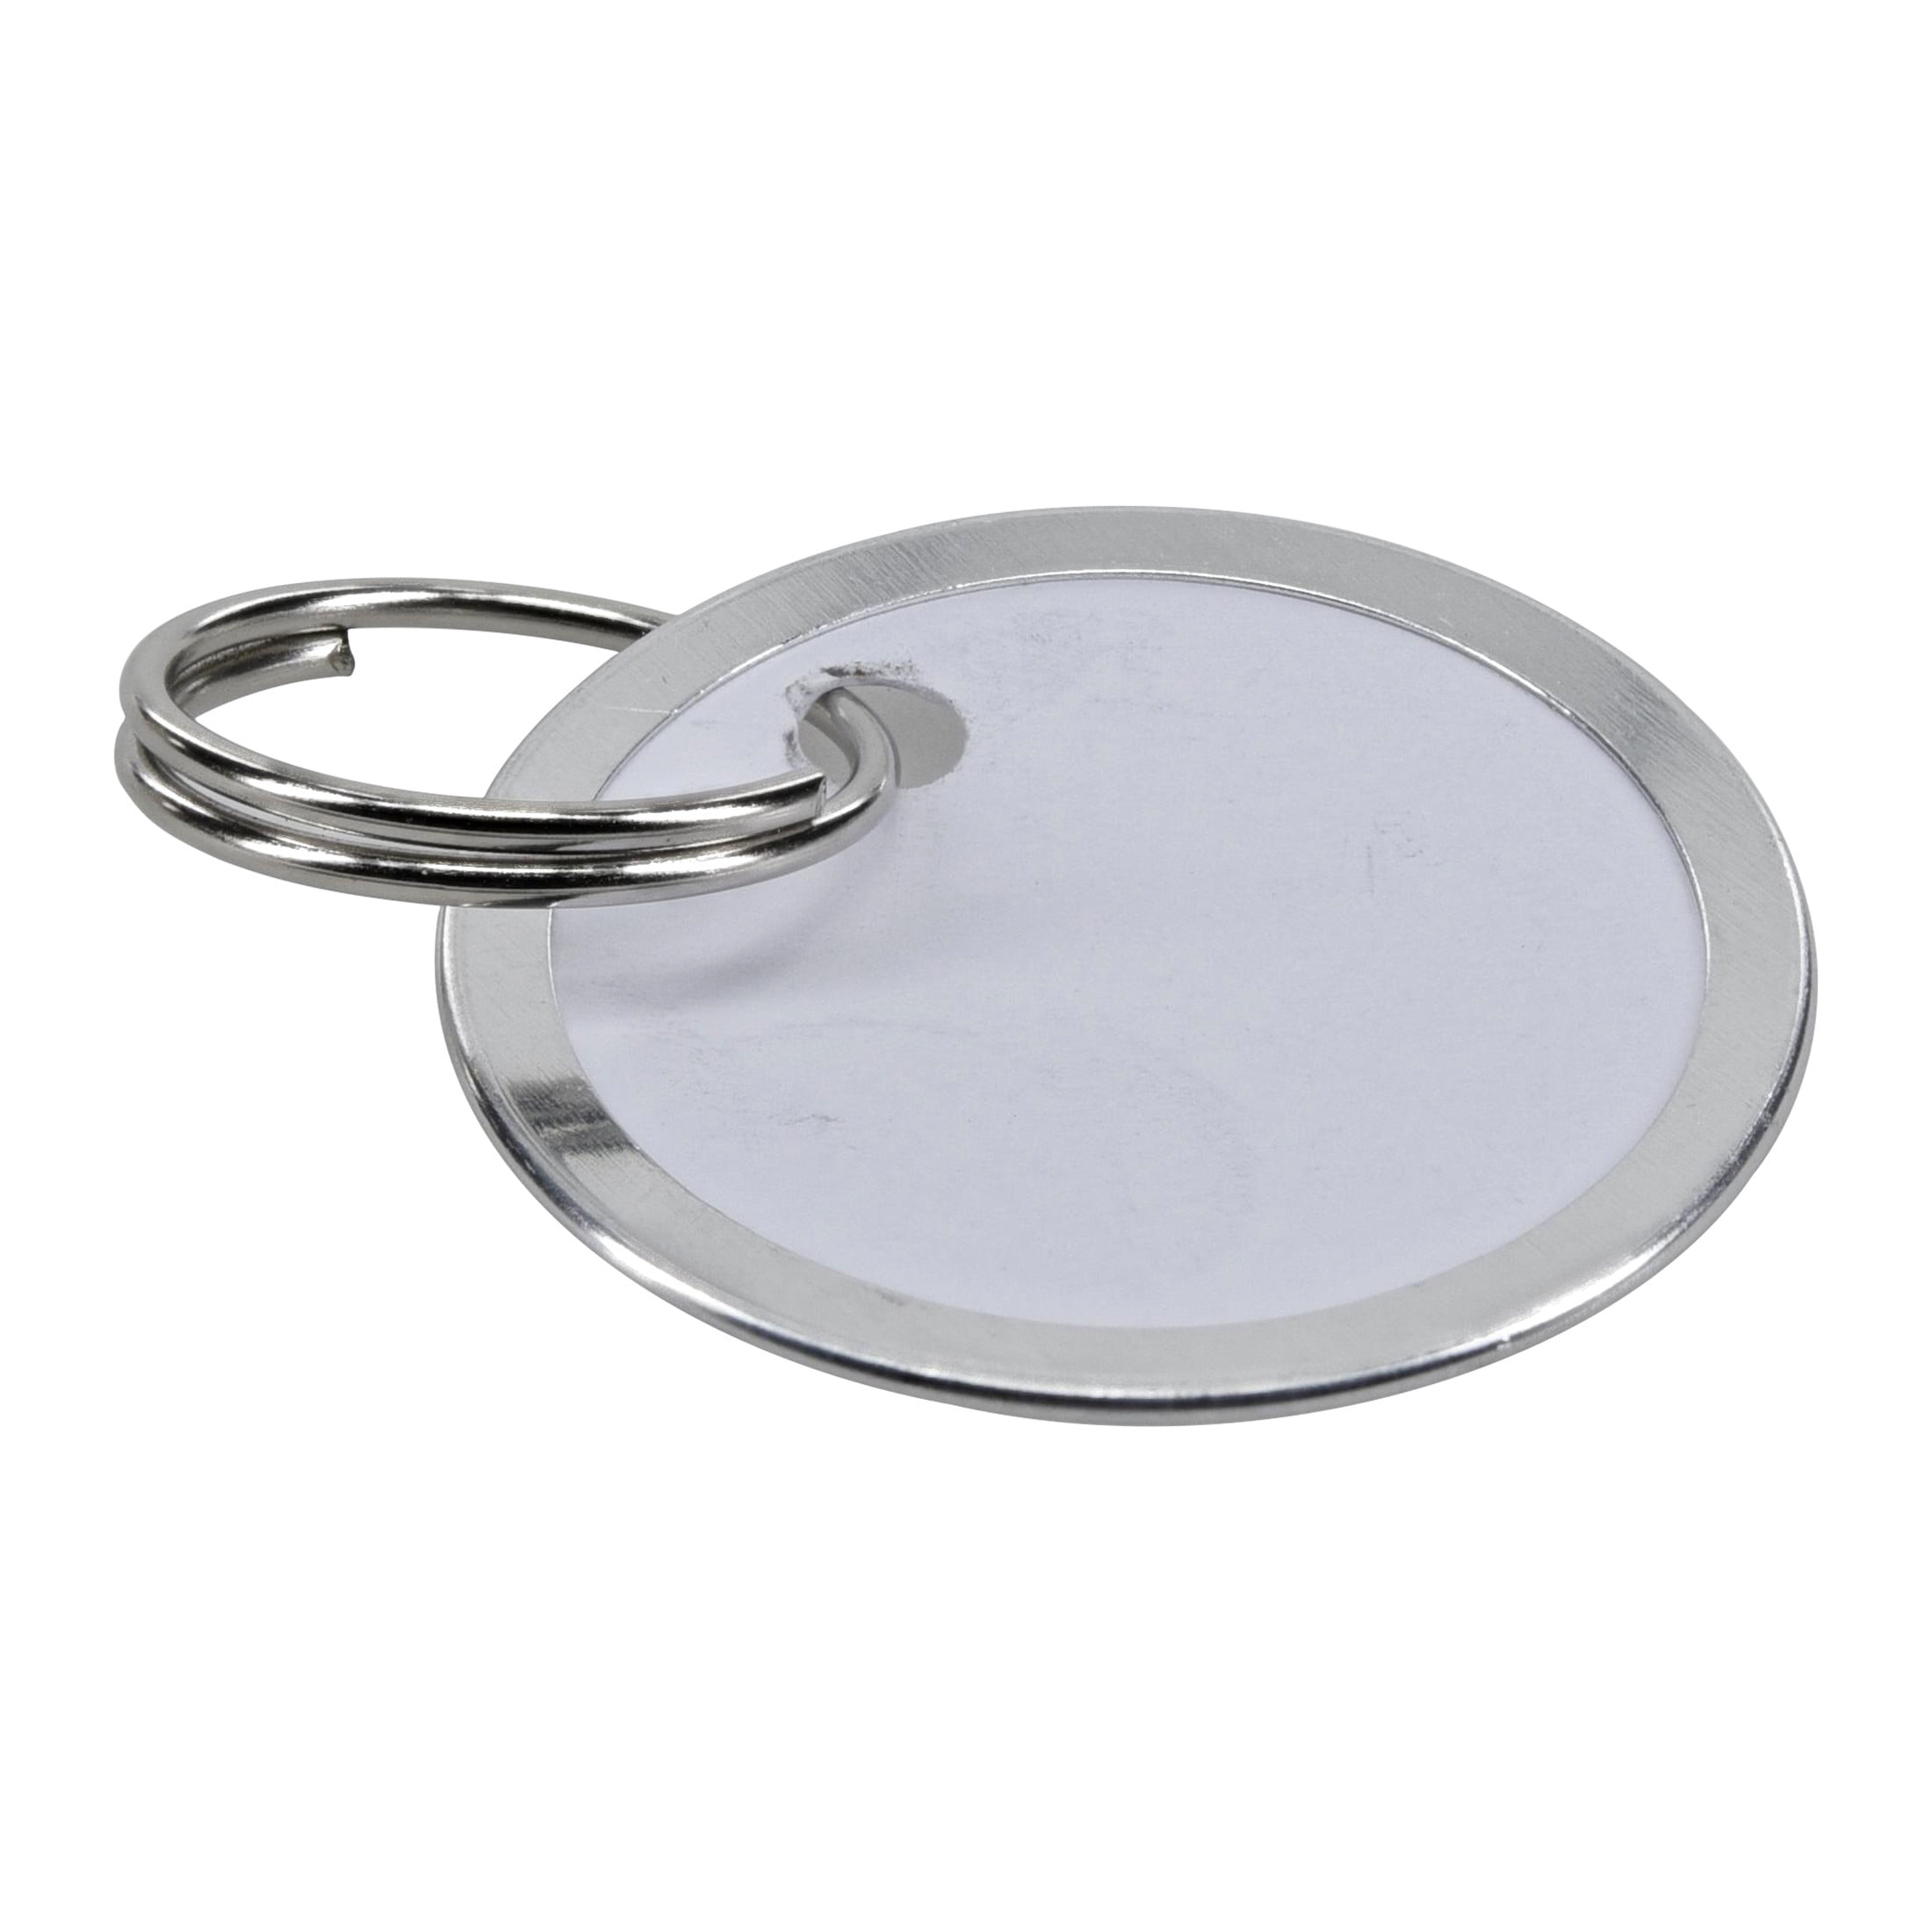 Minute Key 11/4 Metal Rim Paper ID Tags, Attaches to Keychain, White